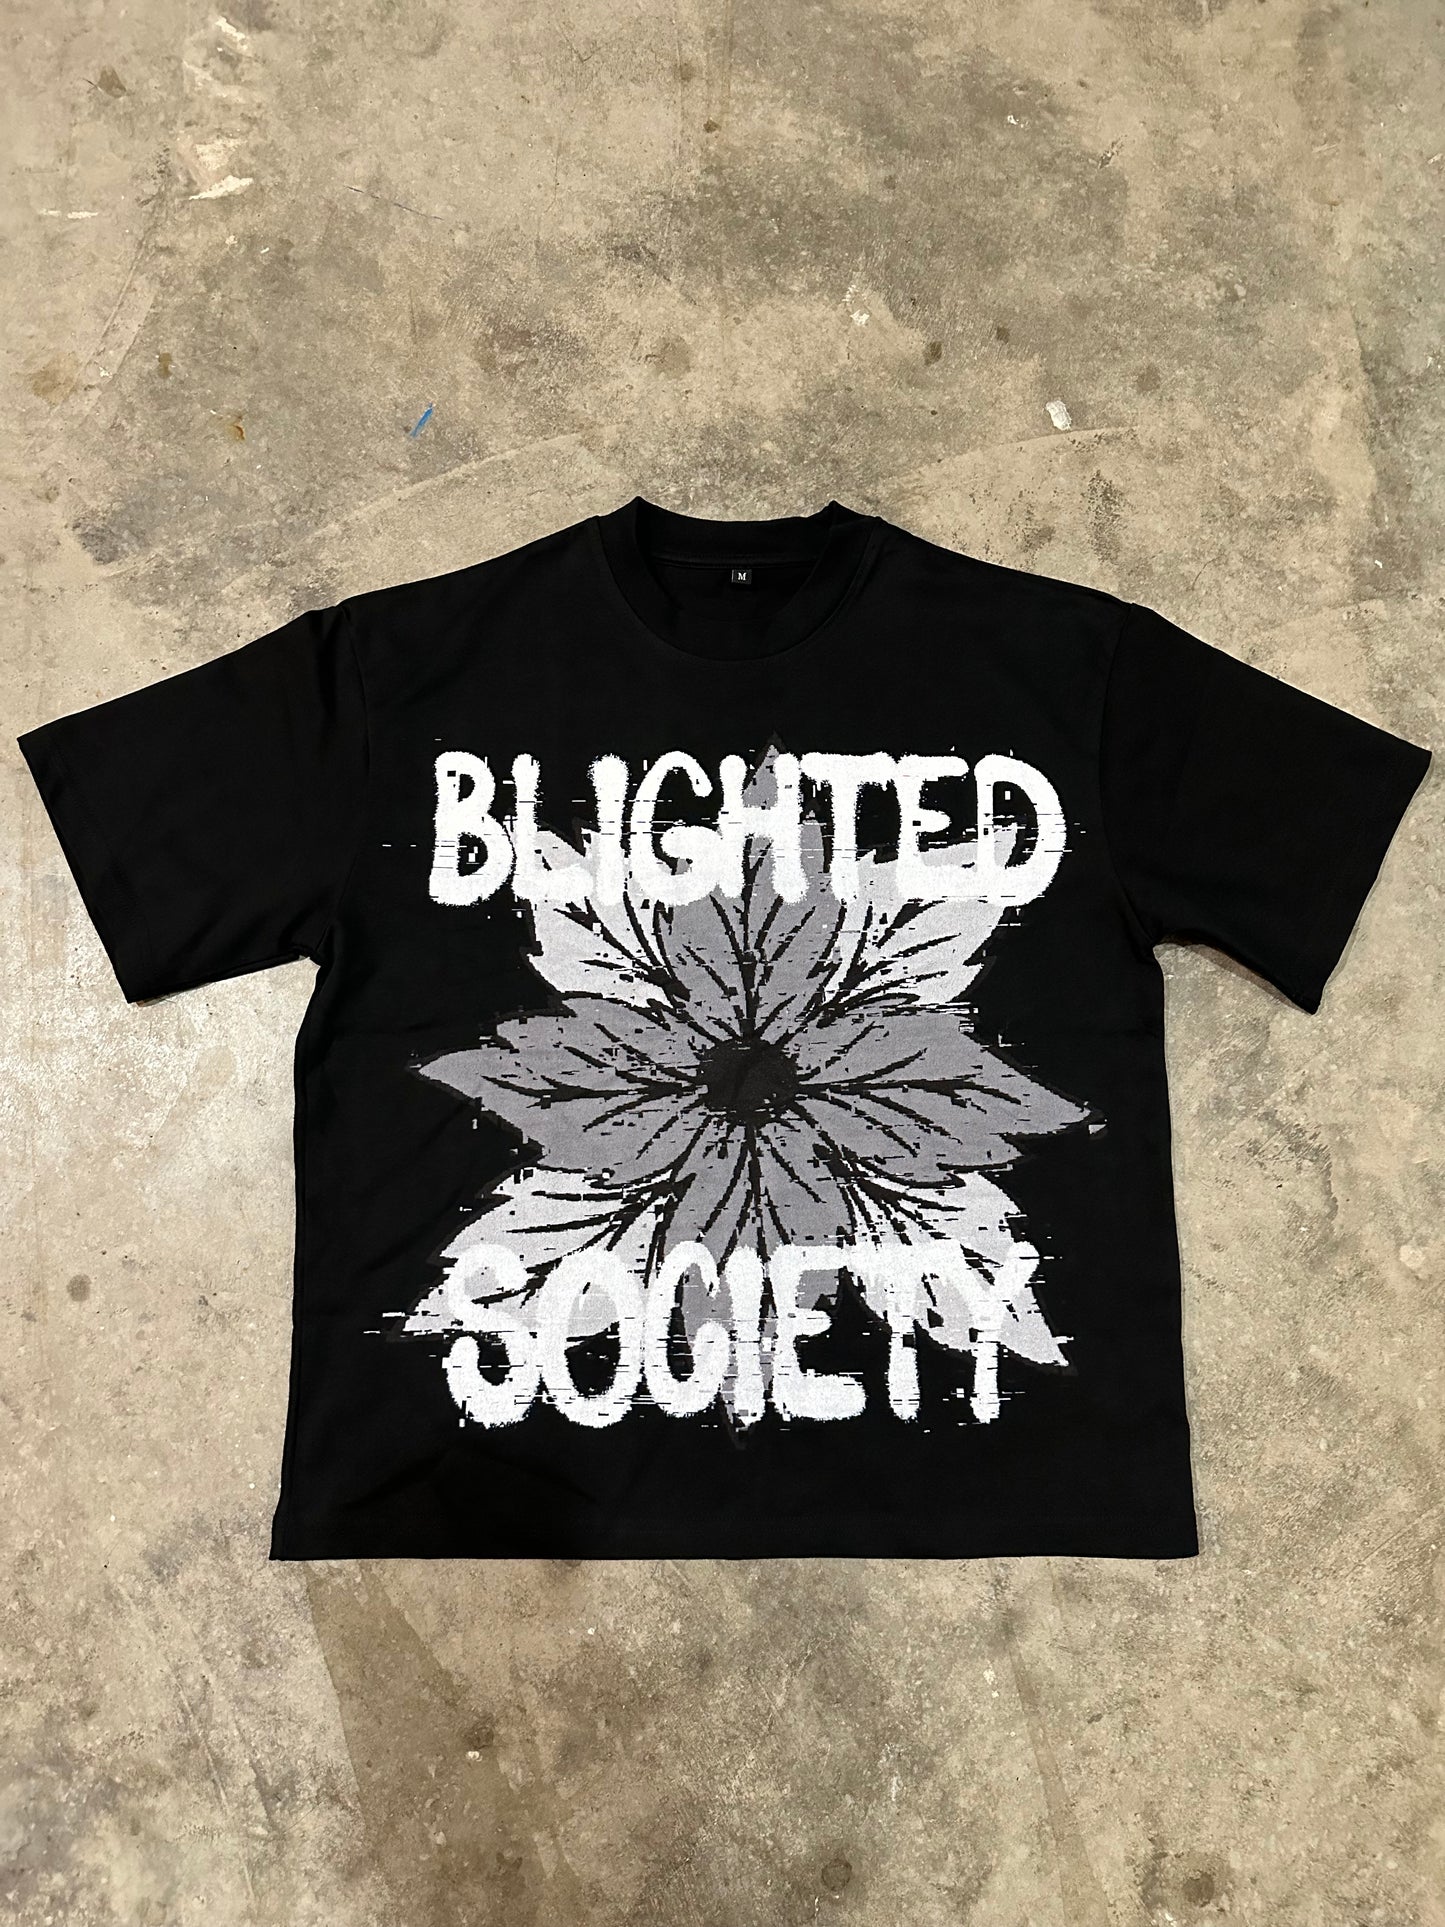 Blighted Society “Glitch” Tee